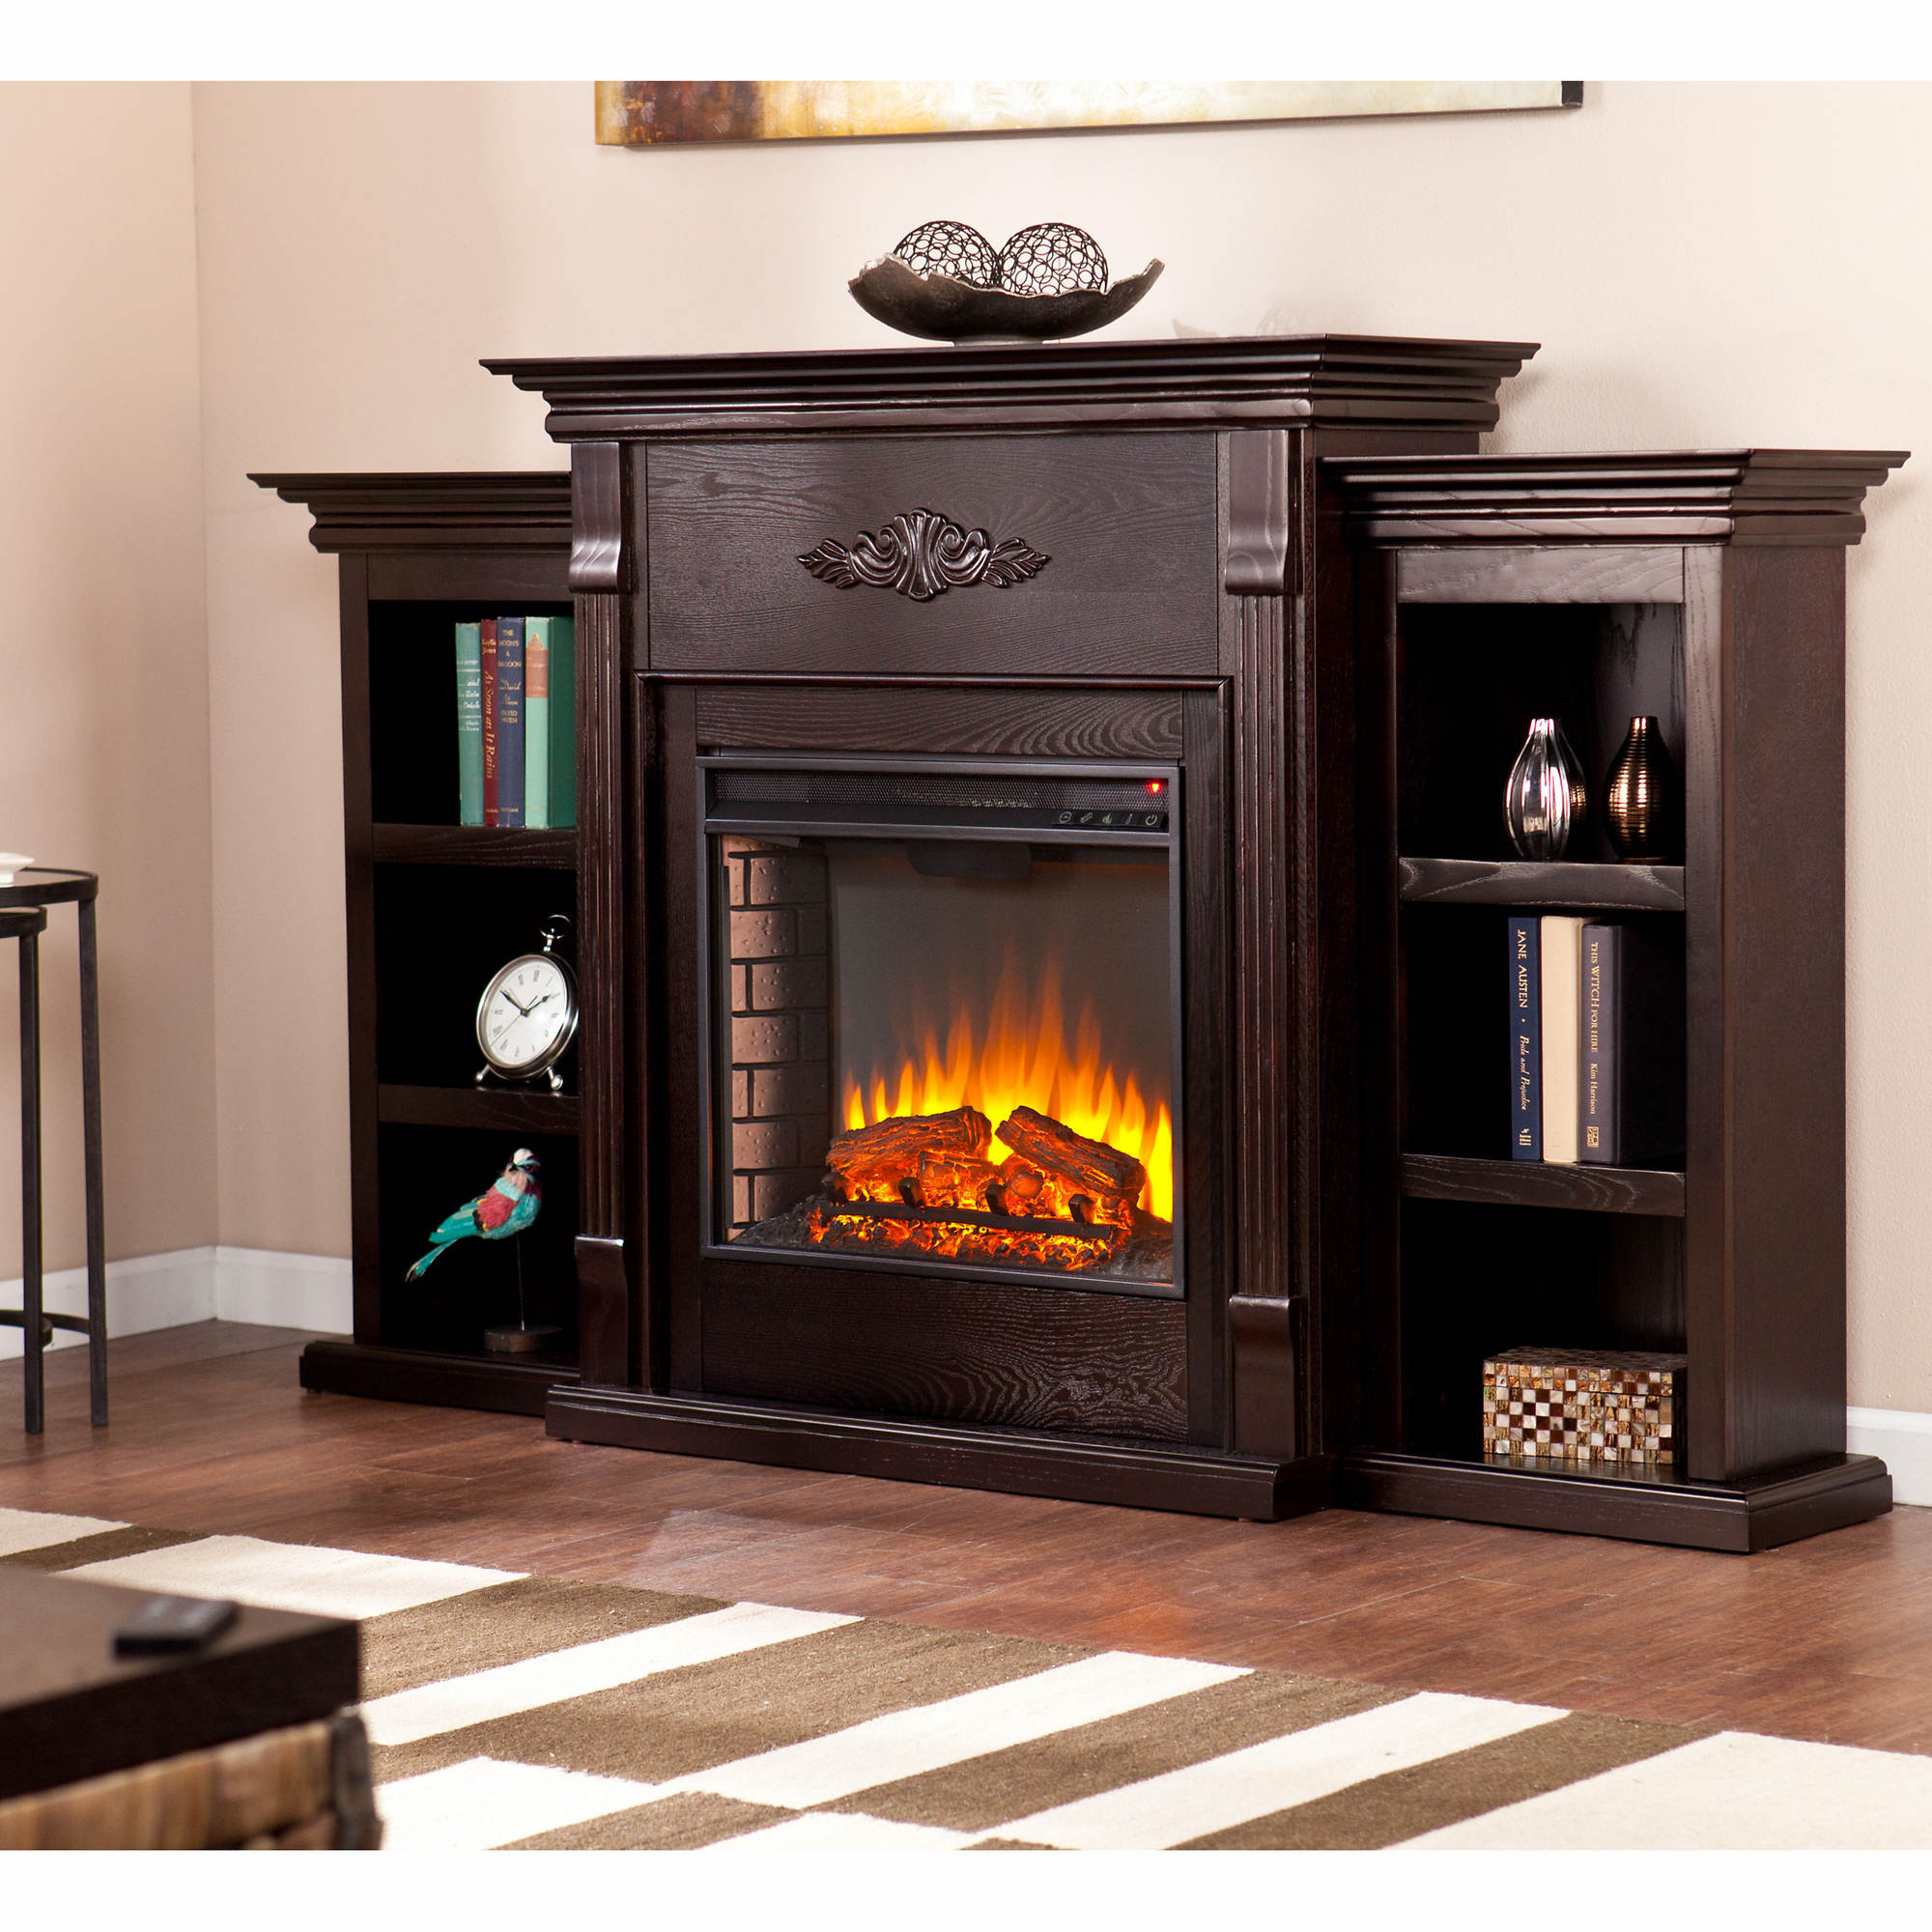 Electric Fireplace Bookshelf
 SEI Newport Electric Fireplace with Bookcases Classic